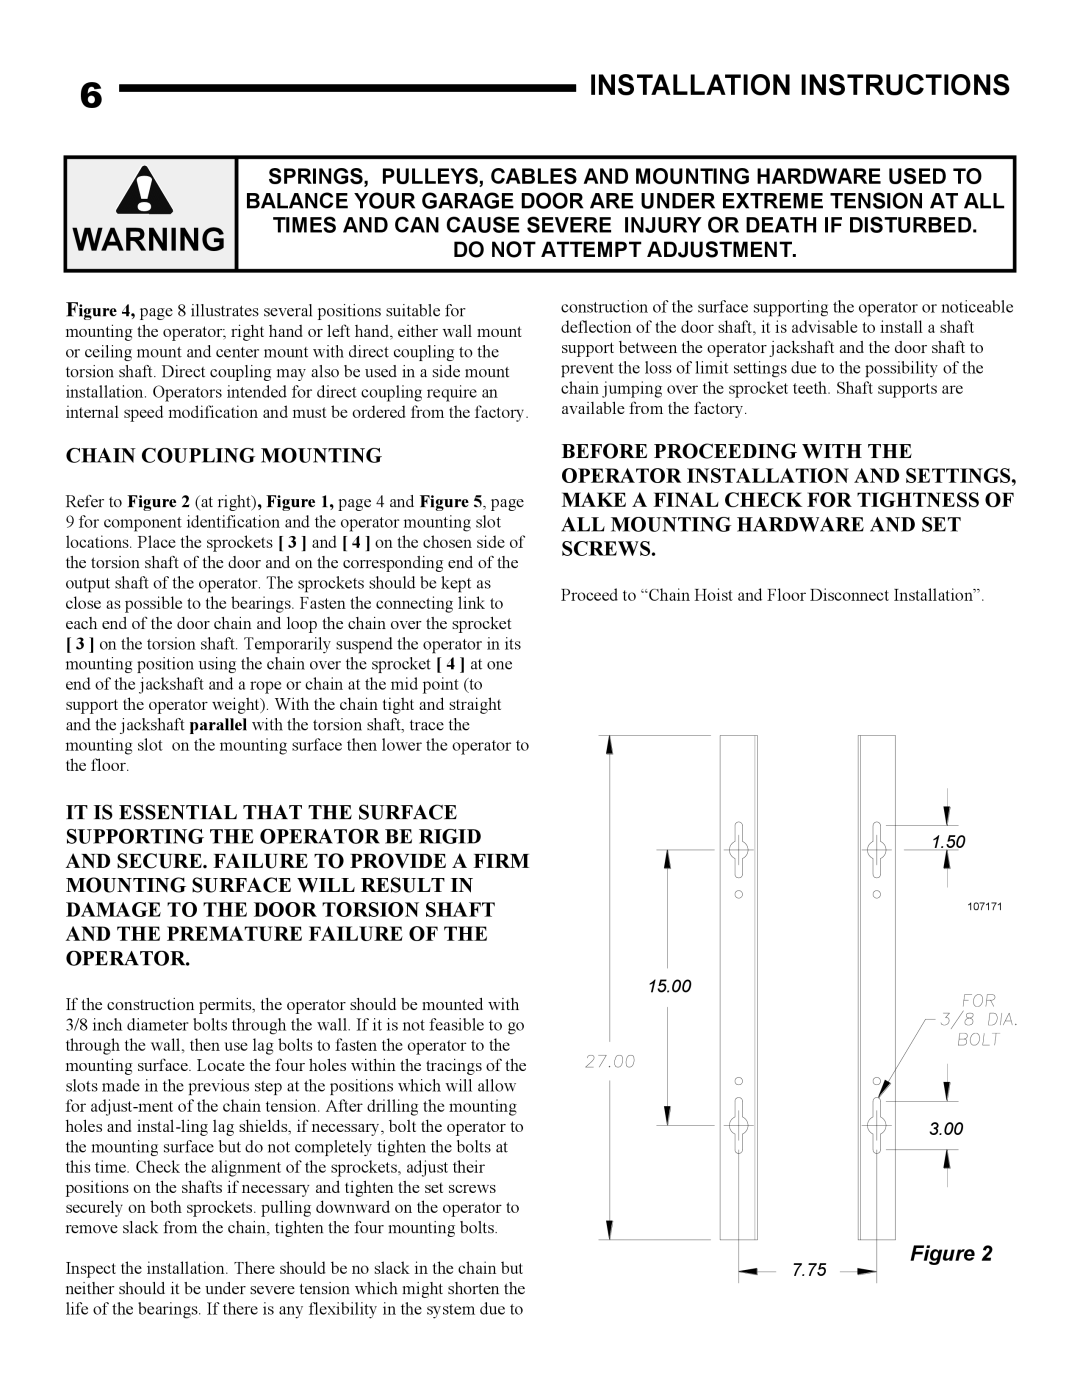 Linear AUJ-S Installation Instructions, Springs, Pulleys, Cables And Mounting Hardware Used To, Do Not Attempt Adjustment 